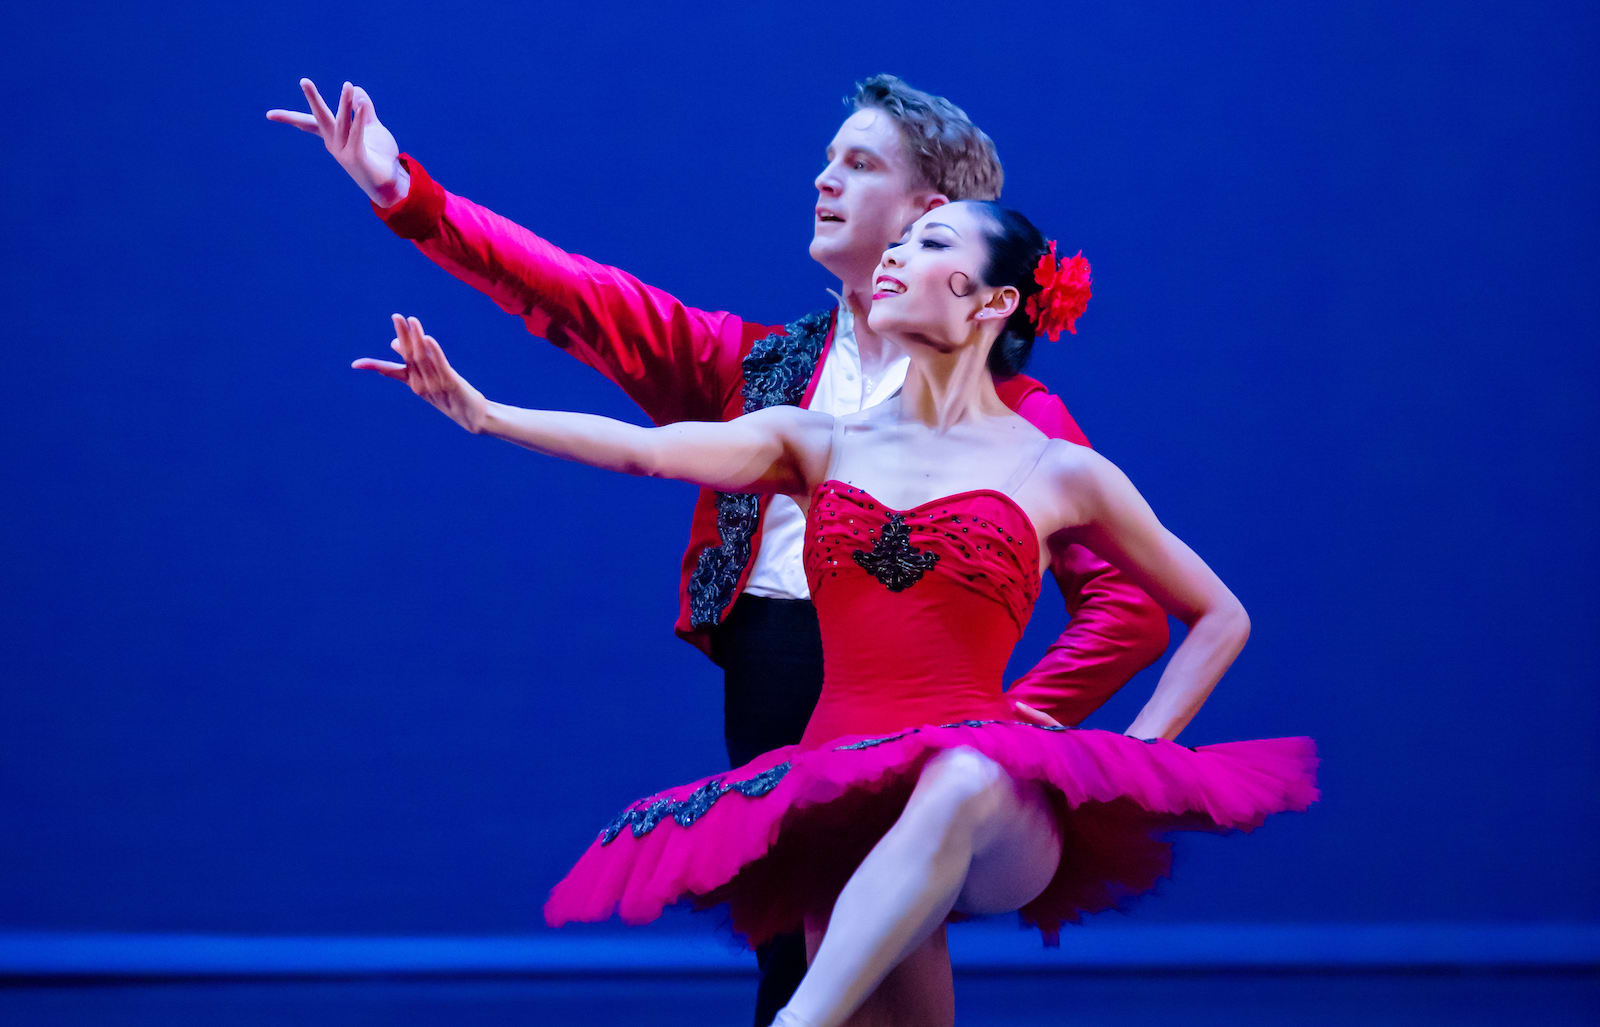 New Zealand School of Dance's 50th Anniversary Graduation Season. Performed by Royal New Zealand Ballet dancers Mayu Tanigaito and Joseph Skelton in ‘Wedding Pas de Deux’ from Don Quixote